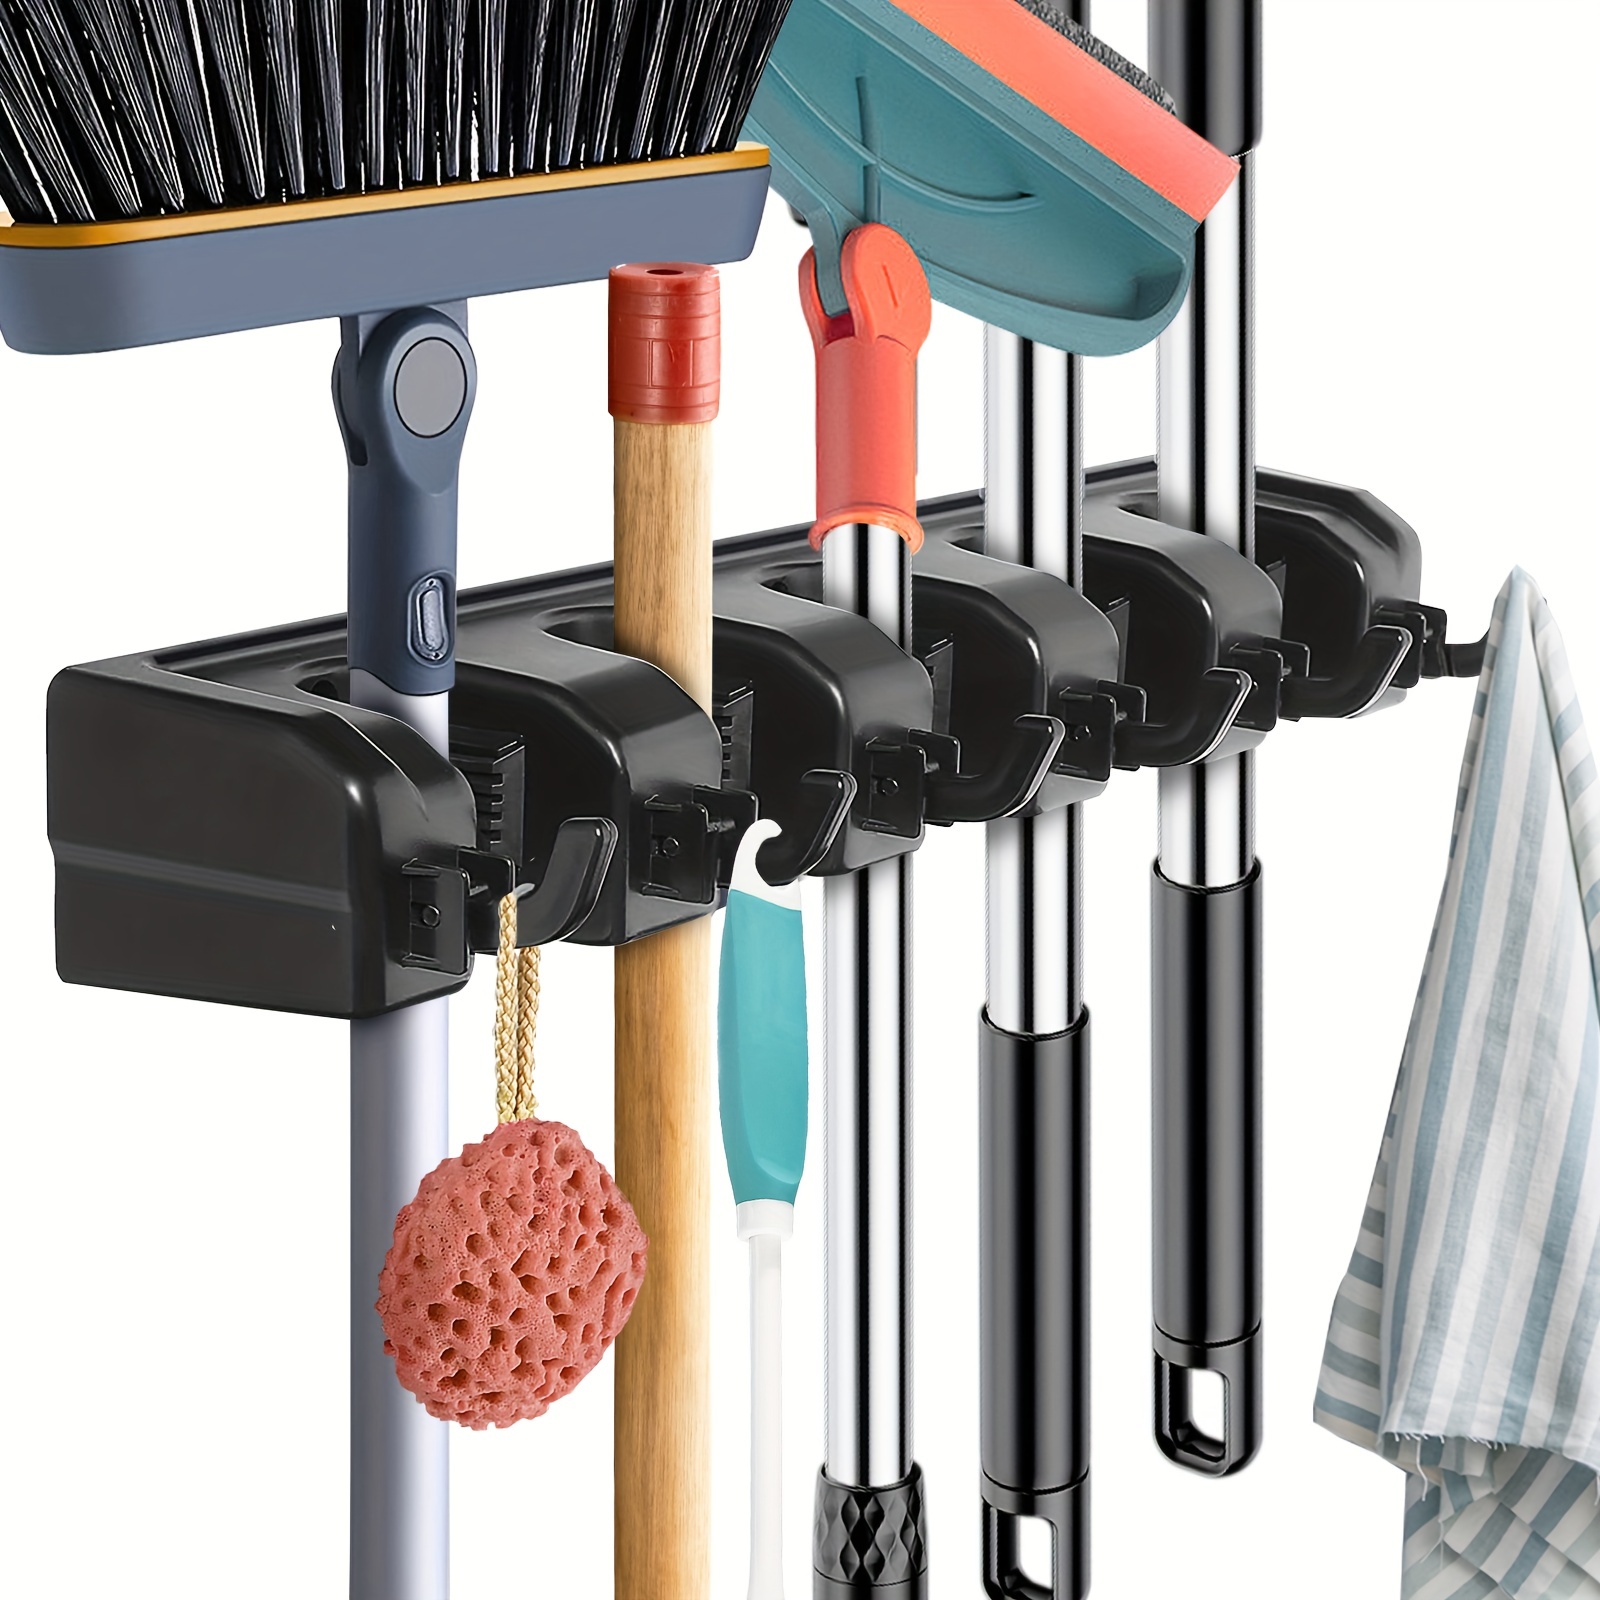  Movable Commercial Stainless Steel Mop Rack,Mop and